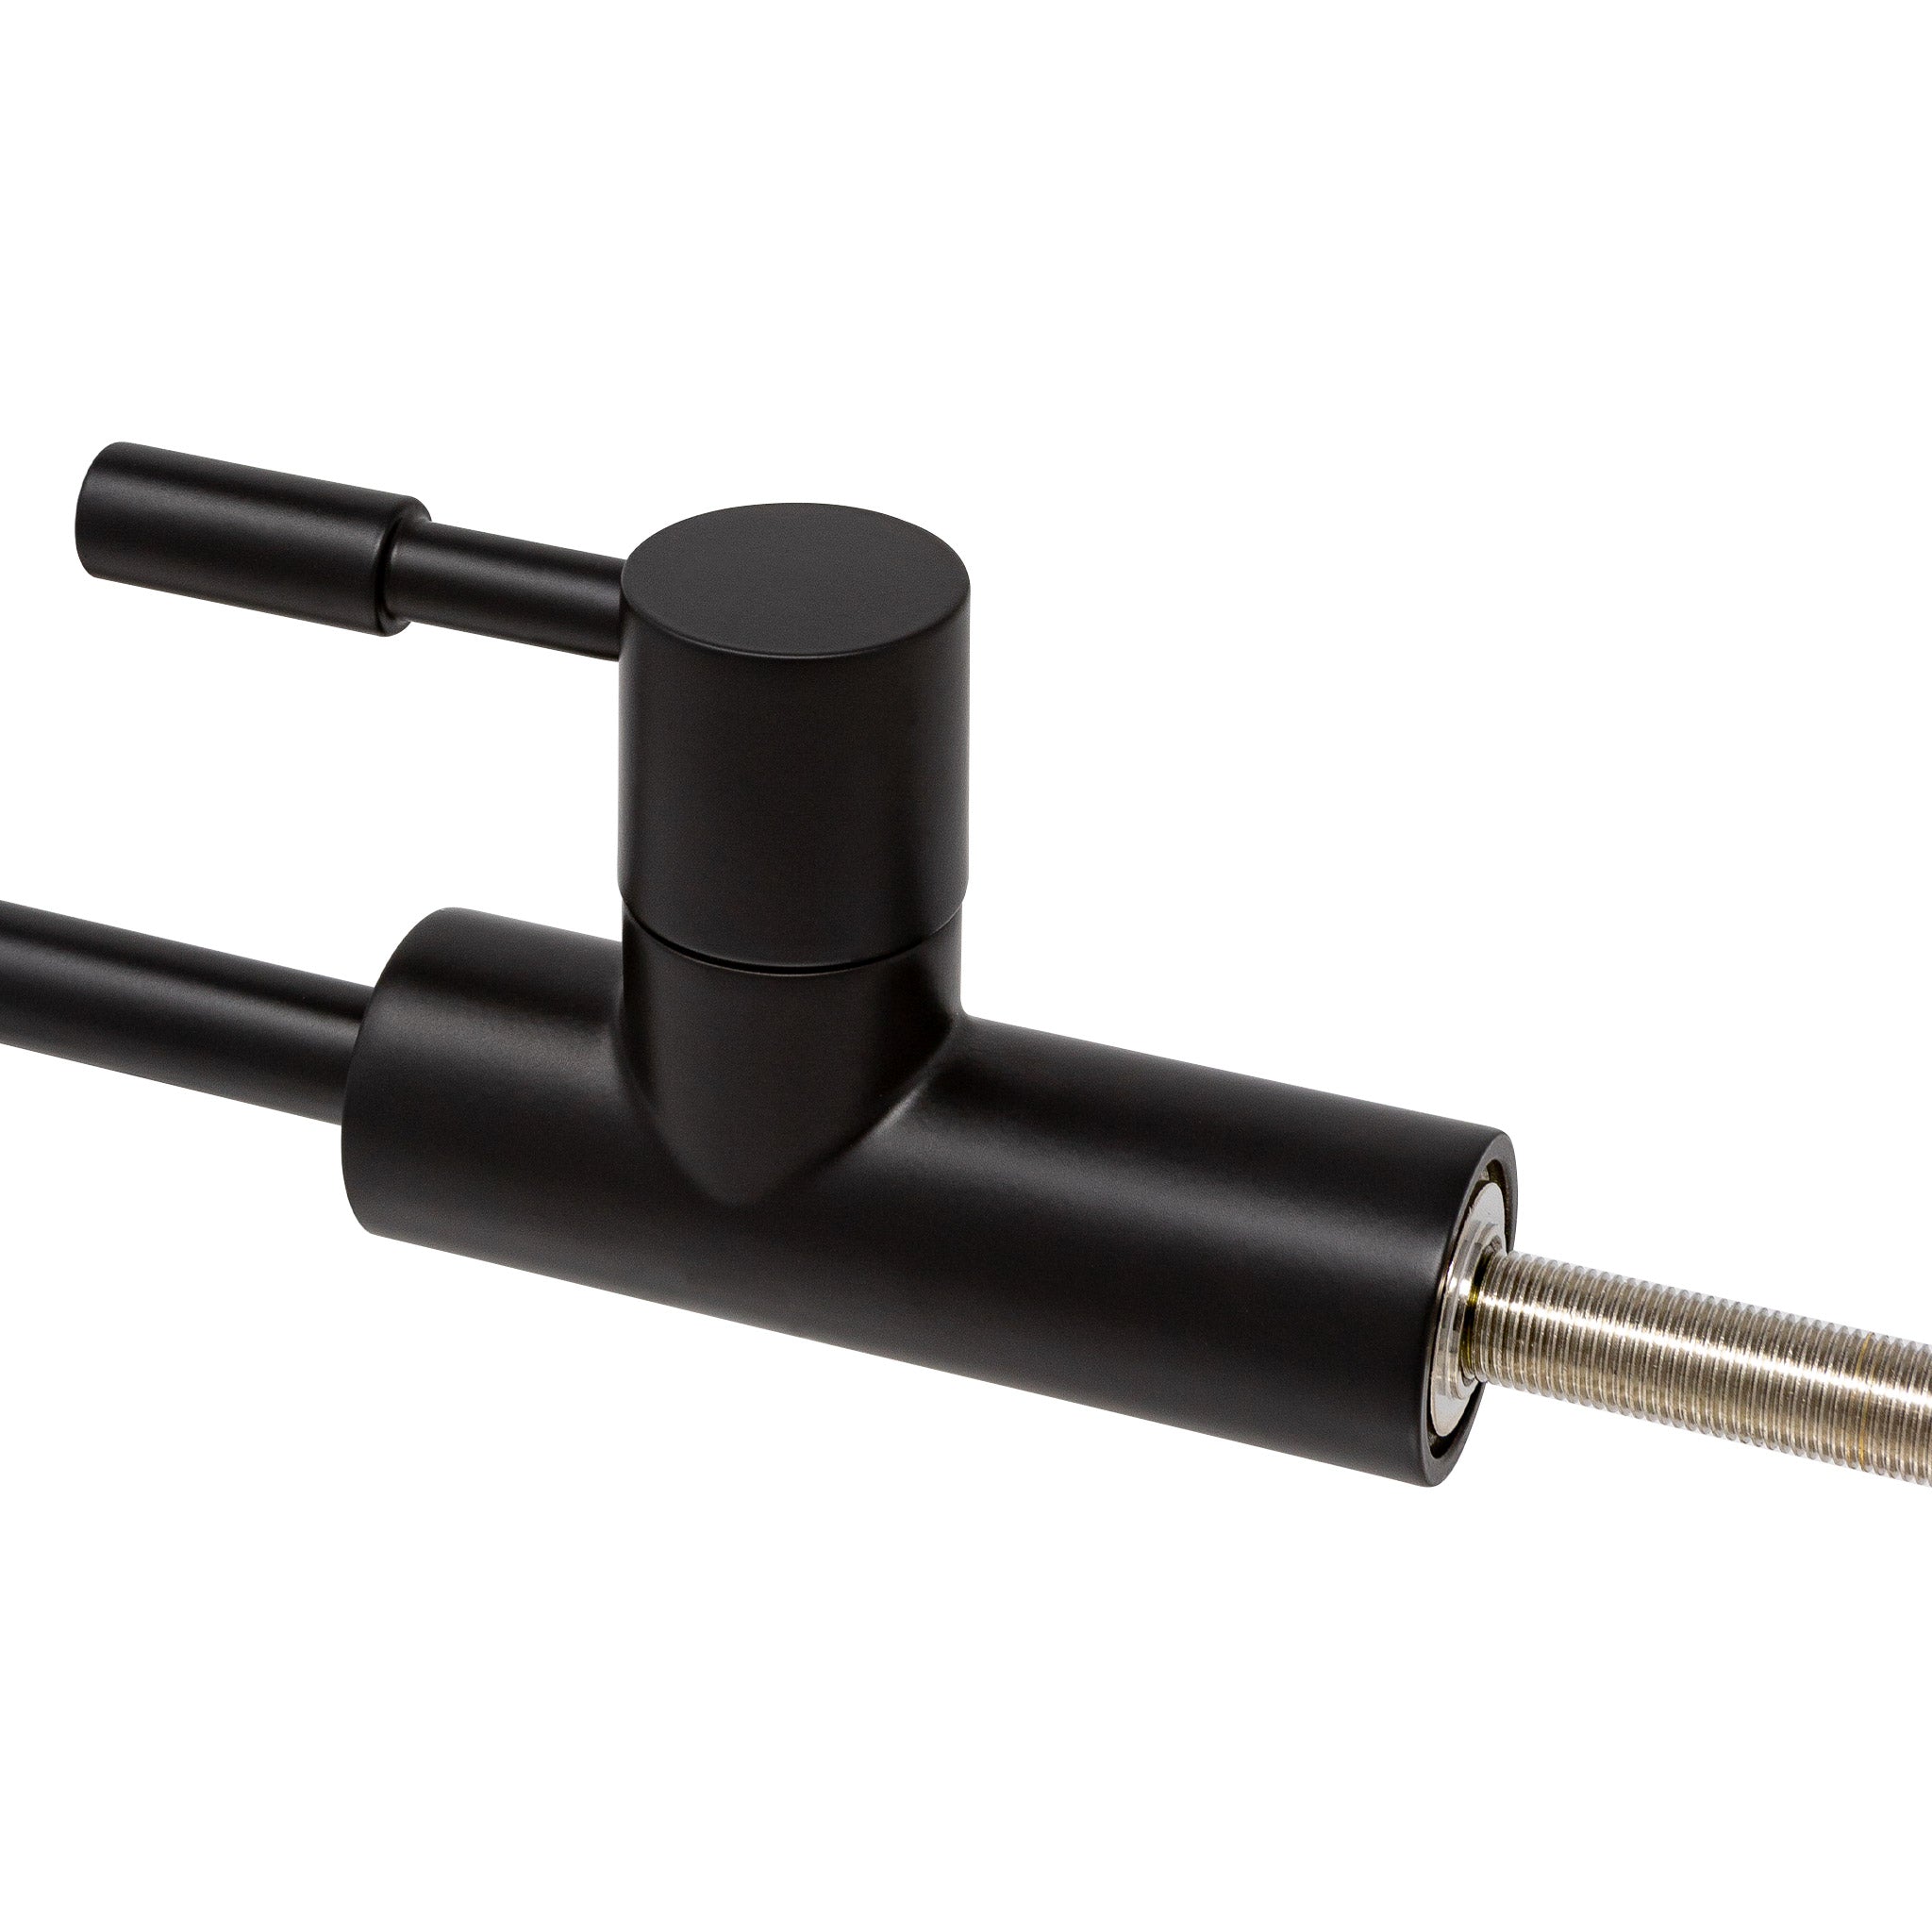 Water Filtration Faucet Matte Black Large Euro Style Reverse Osmosis Non Air Gap. Certified by NSF.